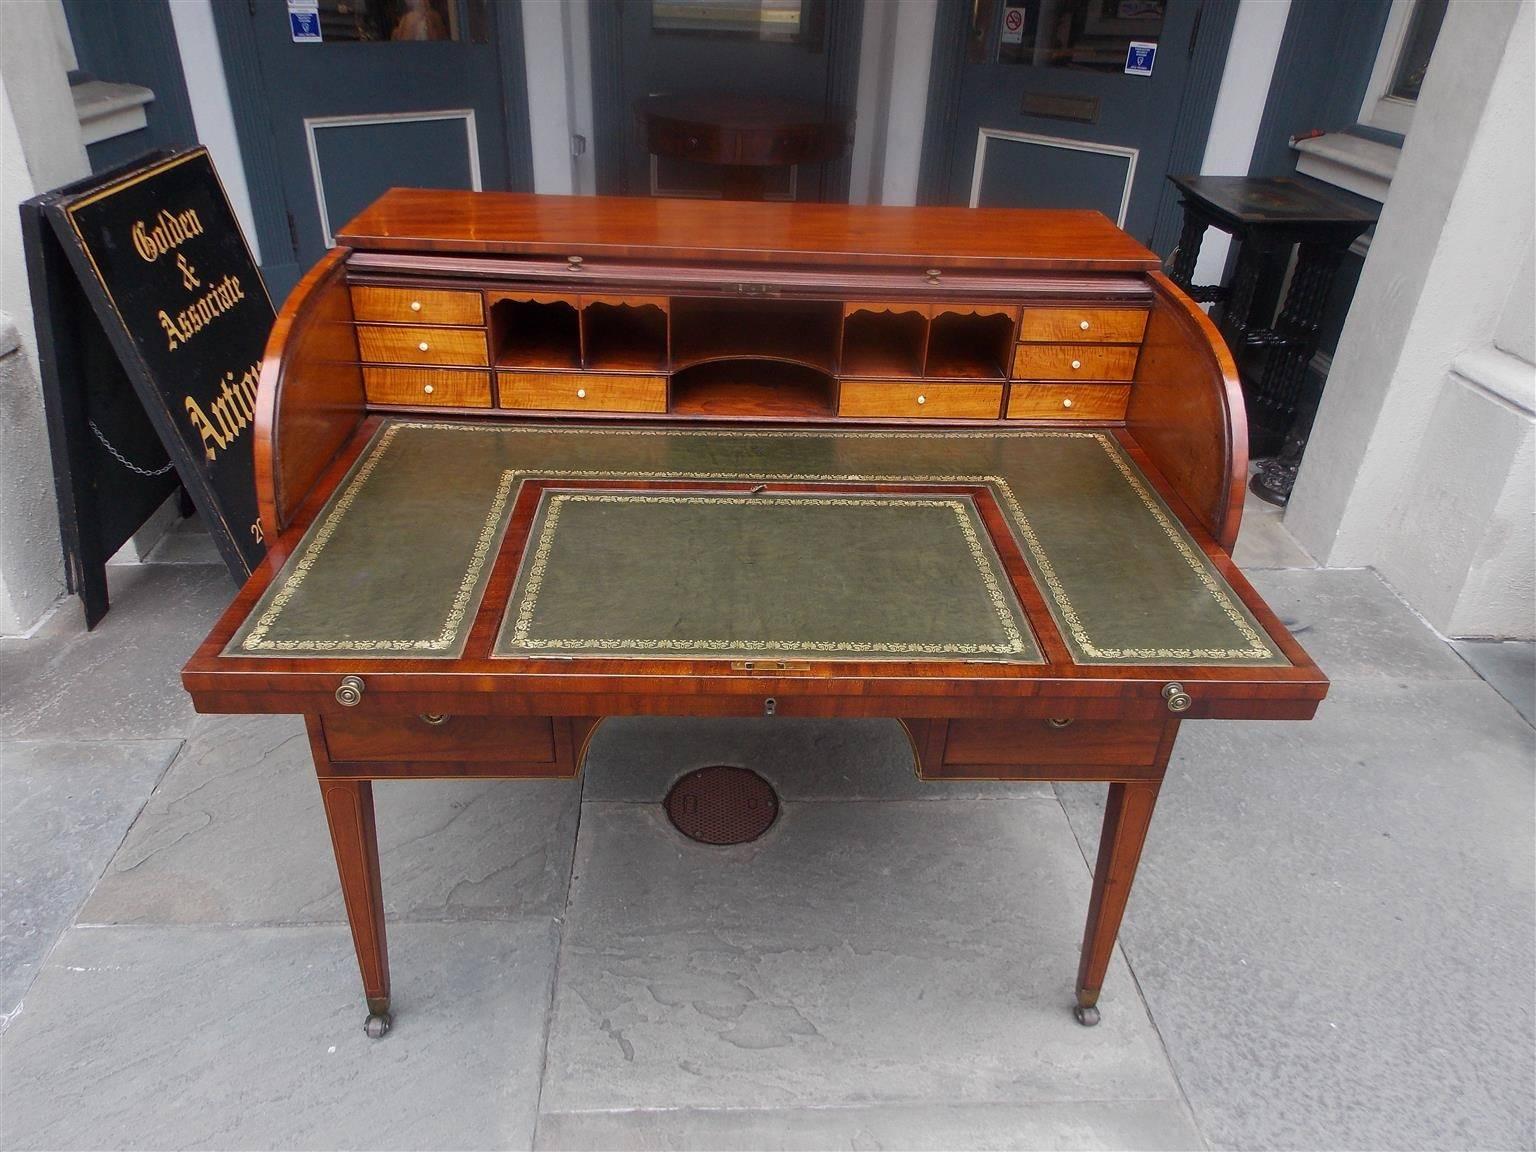 English mahogany tambour desk with sliding leather writing surface, interior satinwood compartmentalized drawers with the original bone knobs, five lower drawers with the original brasses over arched knee hole, ebonized string inlay and terminating